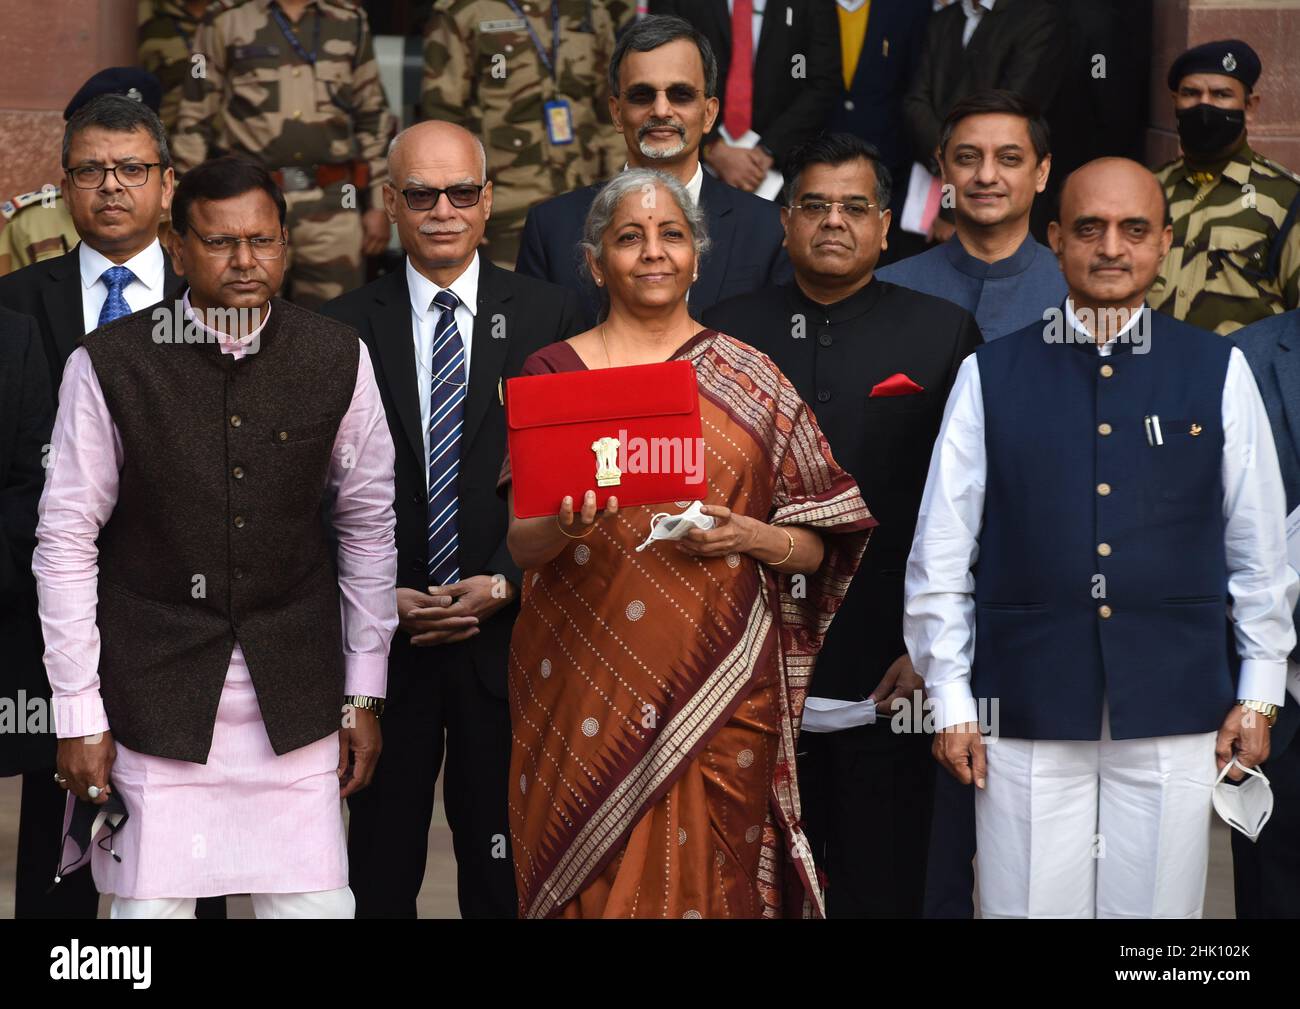 NEW DELHI, INDIA - FEBRUARY 1: Union Minister of Finance Nirmala Sitharaman is seen holding the tab instead of traditional ‘bahi khata' along with MoS Finance Pankaj Chaudhary, Bhagwat Karad and other senior officials before leaving from Ministry of Finance to the Parliament to present Union Budget 2022-23 on February 1, 2022 in New Delhi, India. Nirmala Sitharaman, who presented Union Budget 2022 in Parliament on Tuesday, said that it will lay the foundation for economic growth through public investment as Asia's third-largest economy emerges from a pandemic-induced slump. (Photo by Ajay Agga Stock Photo